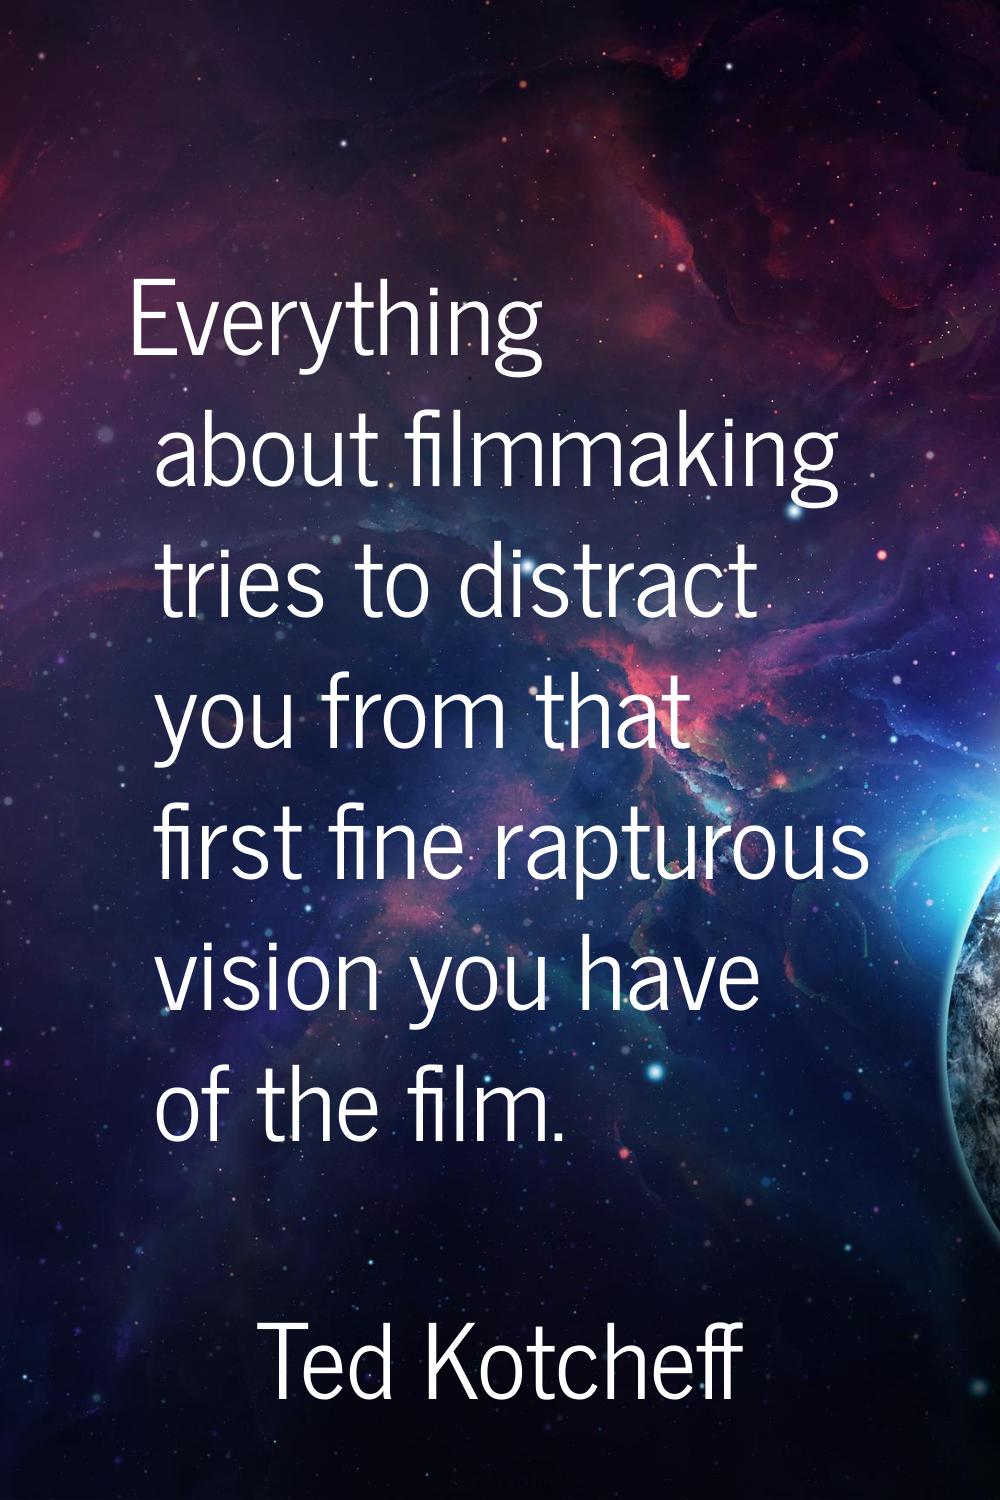 Everything about filmmaking tries to distract you from that first fine rapturous vision you have of